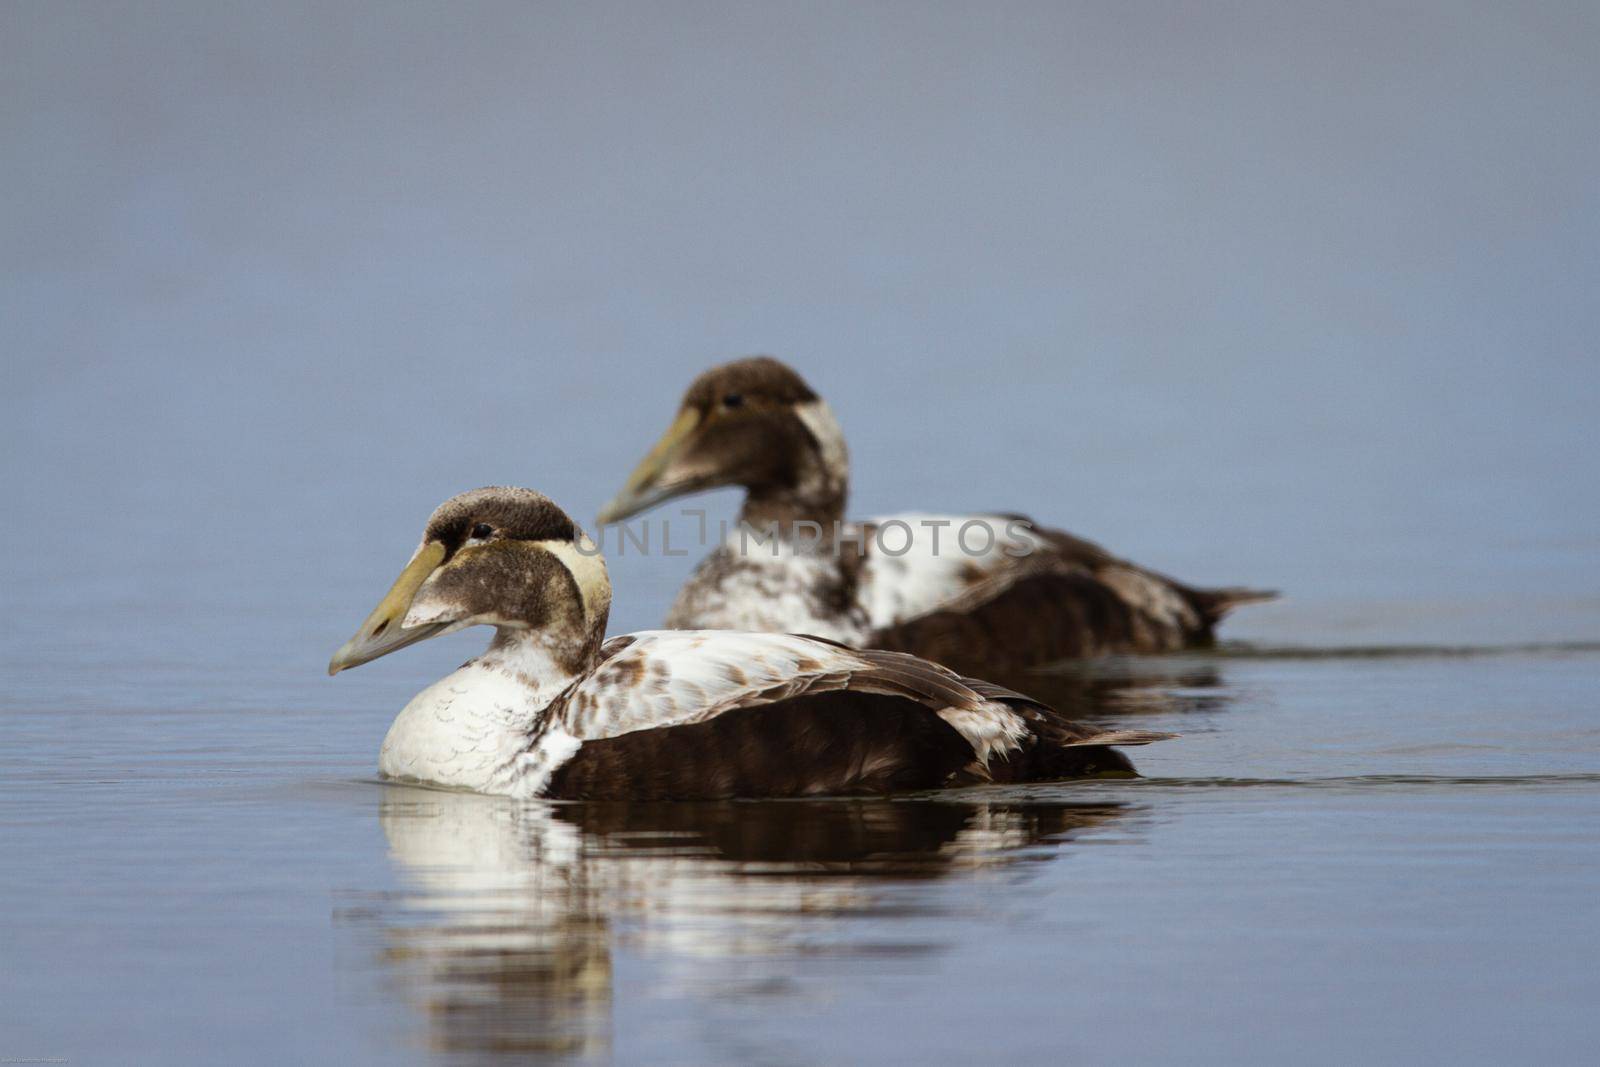 Two young male common eider ducks swimming a pond by Granchinho